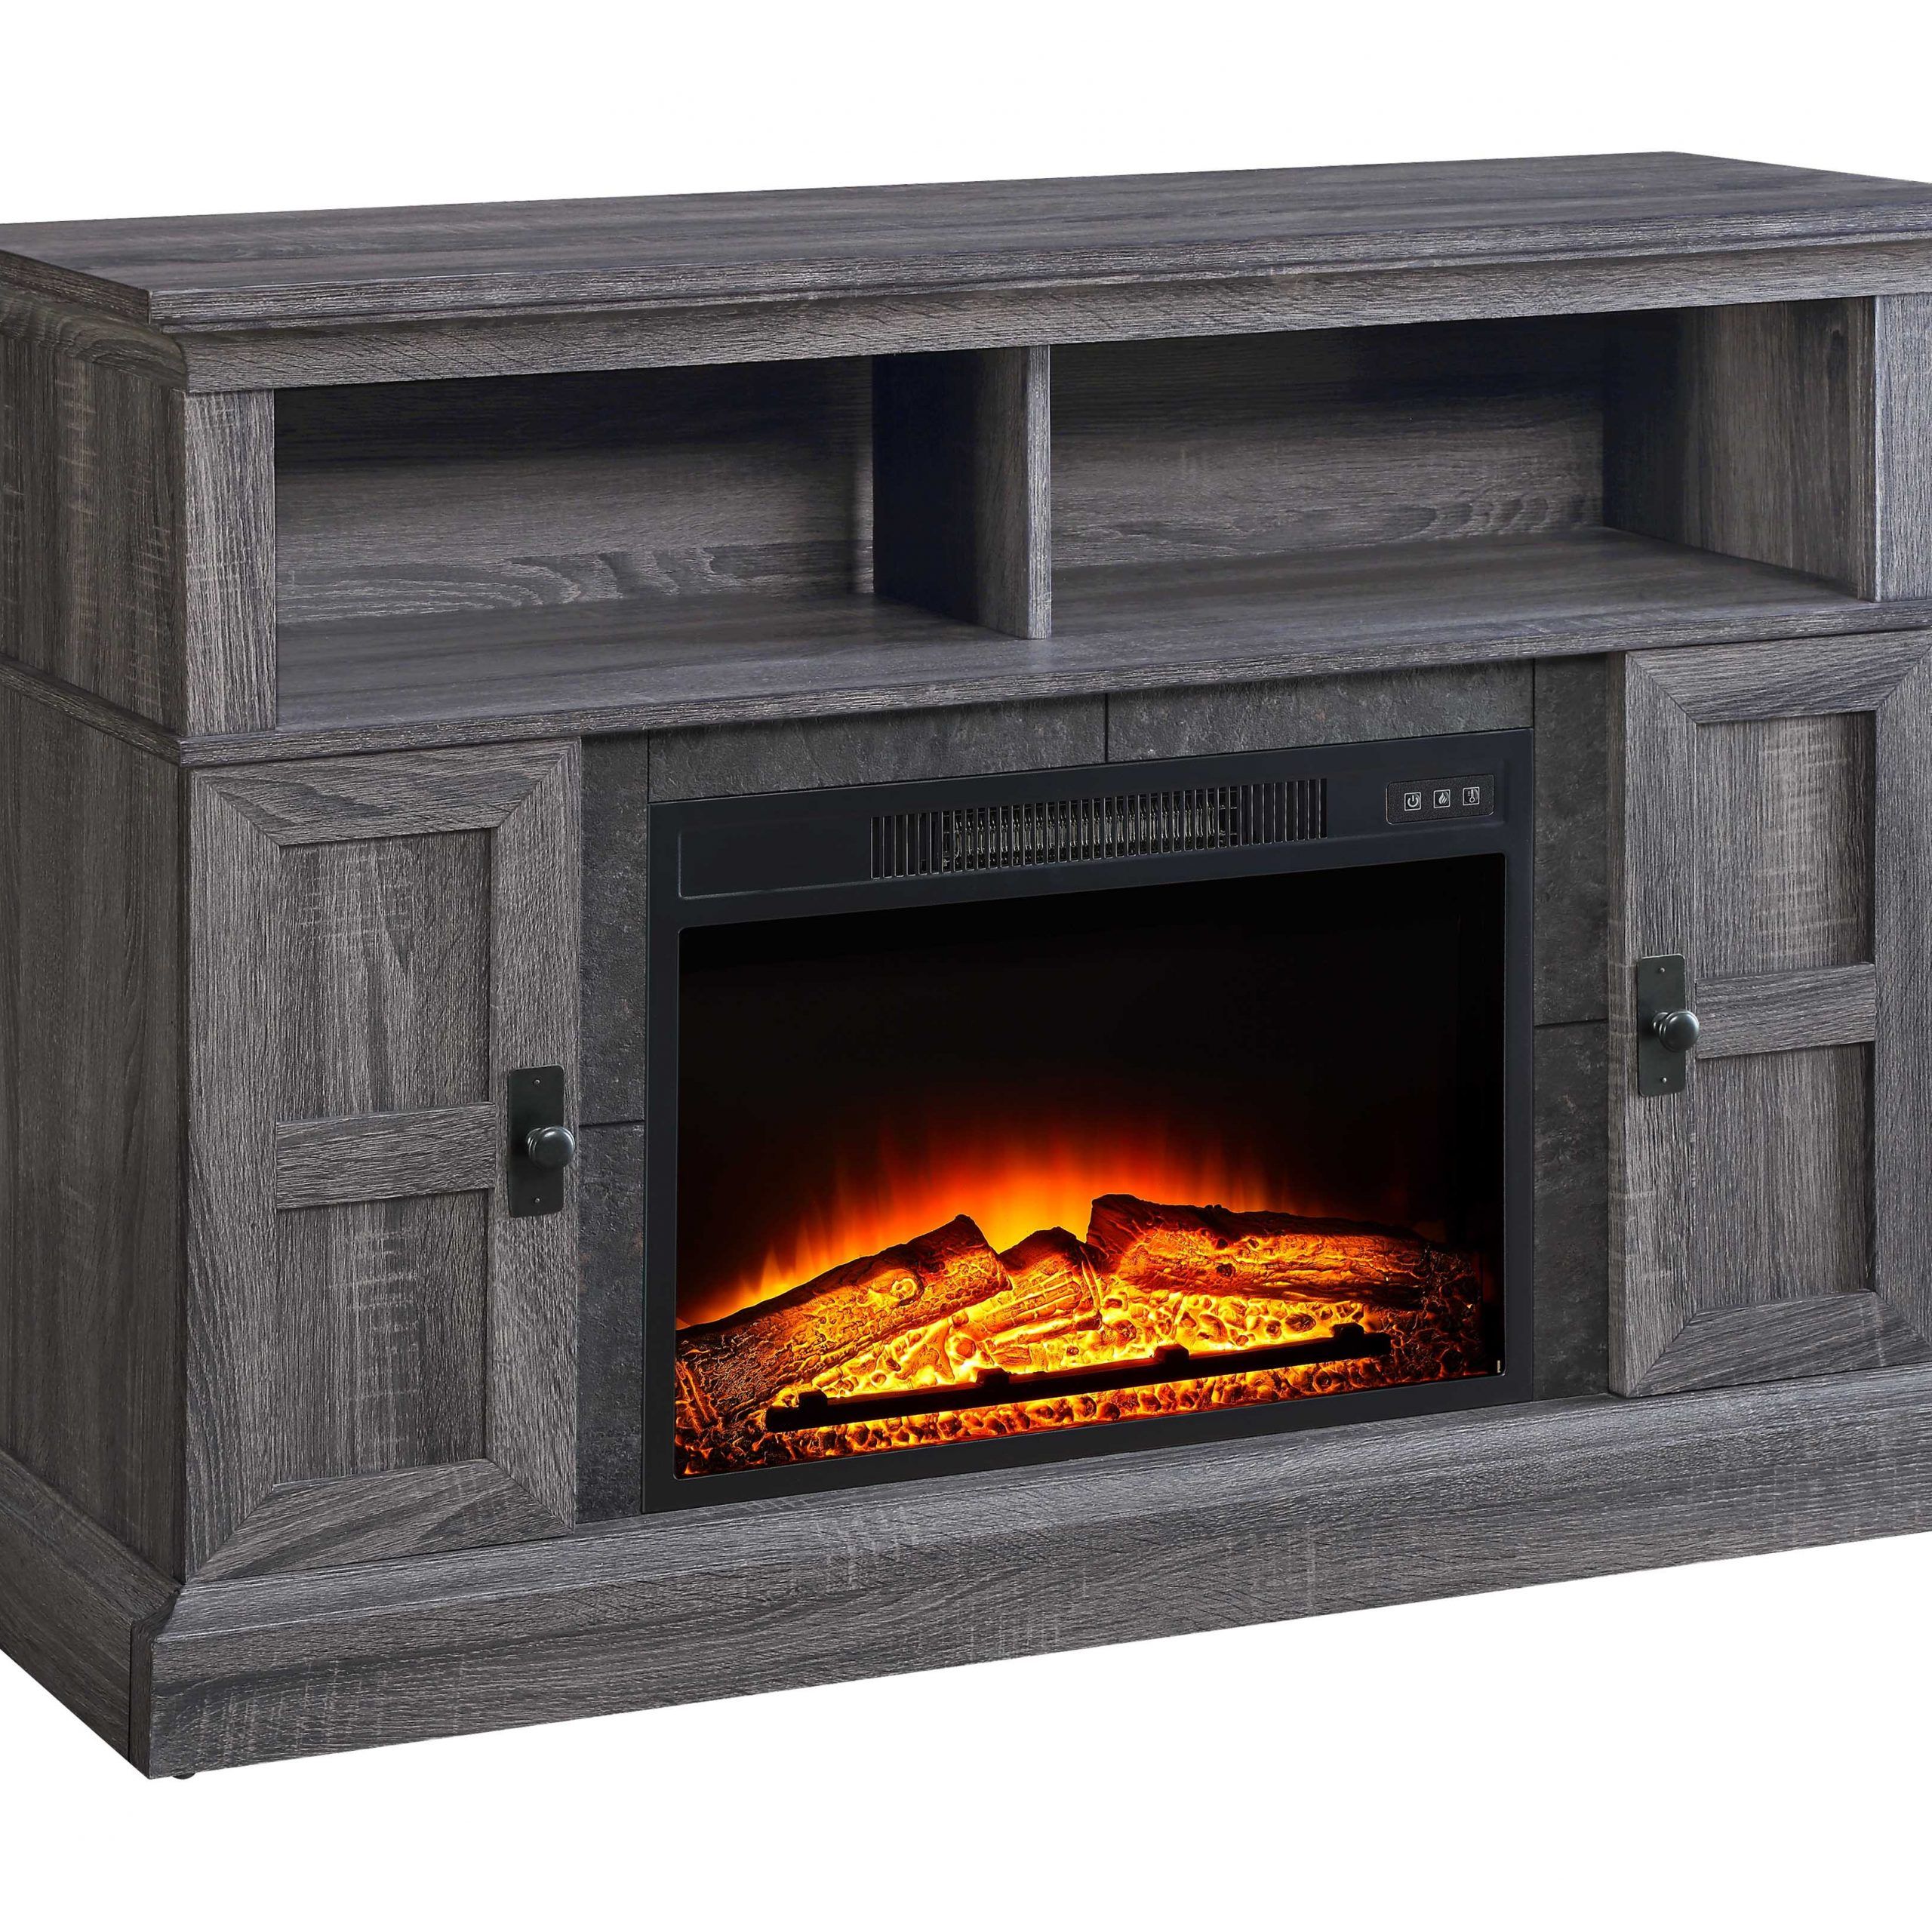 Whalen Media Fireplace Console For Tvs Up To 55", Dark Within Fireplace Media Console Tv Stands With Weathered Finish (View 10 of 15)